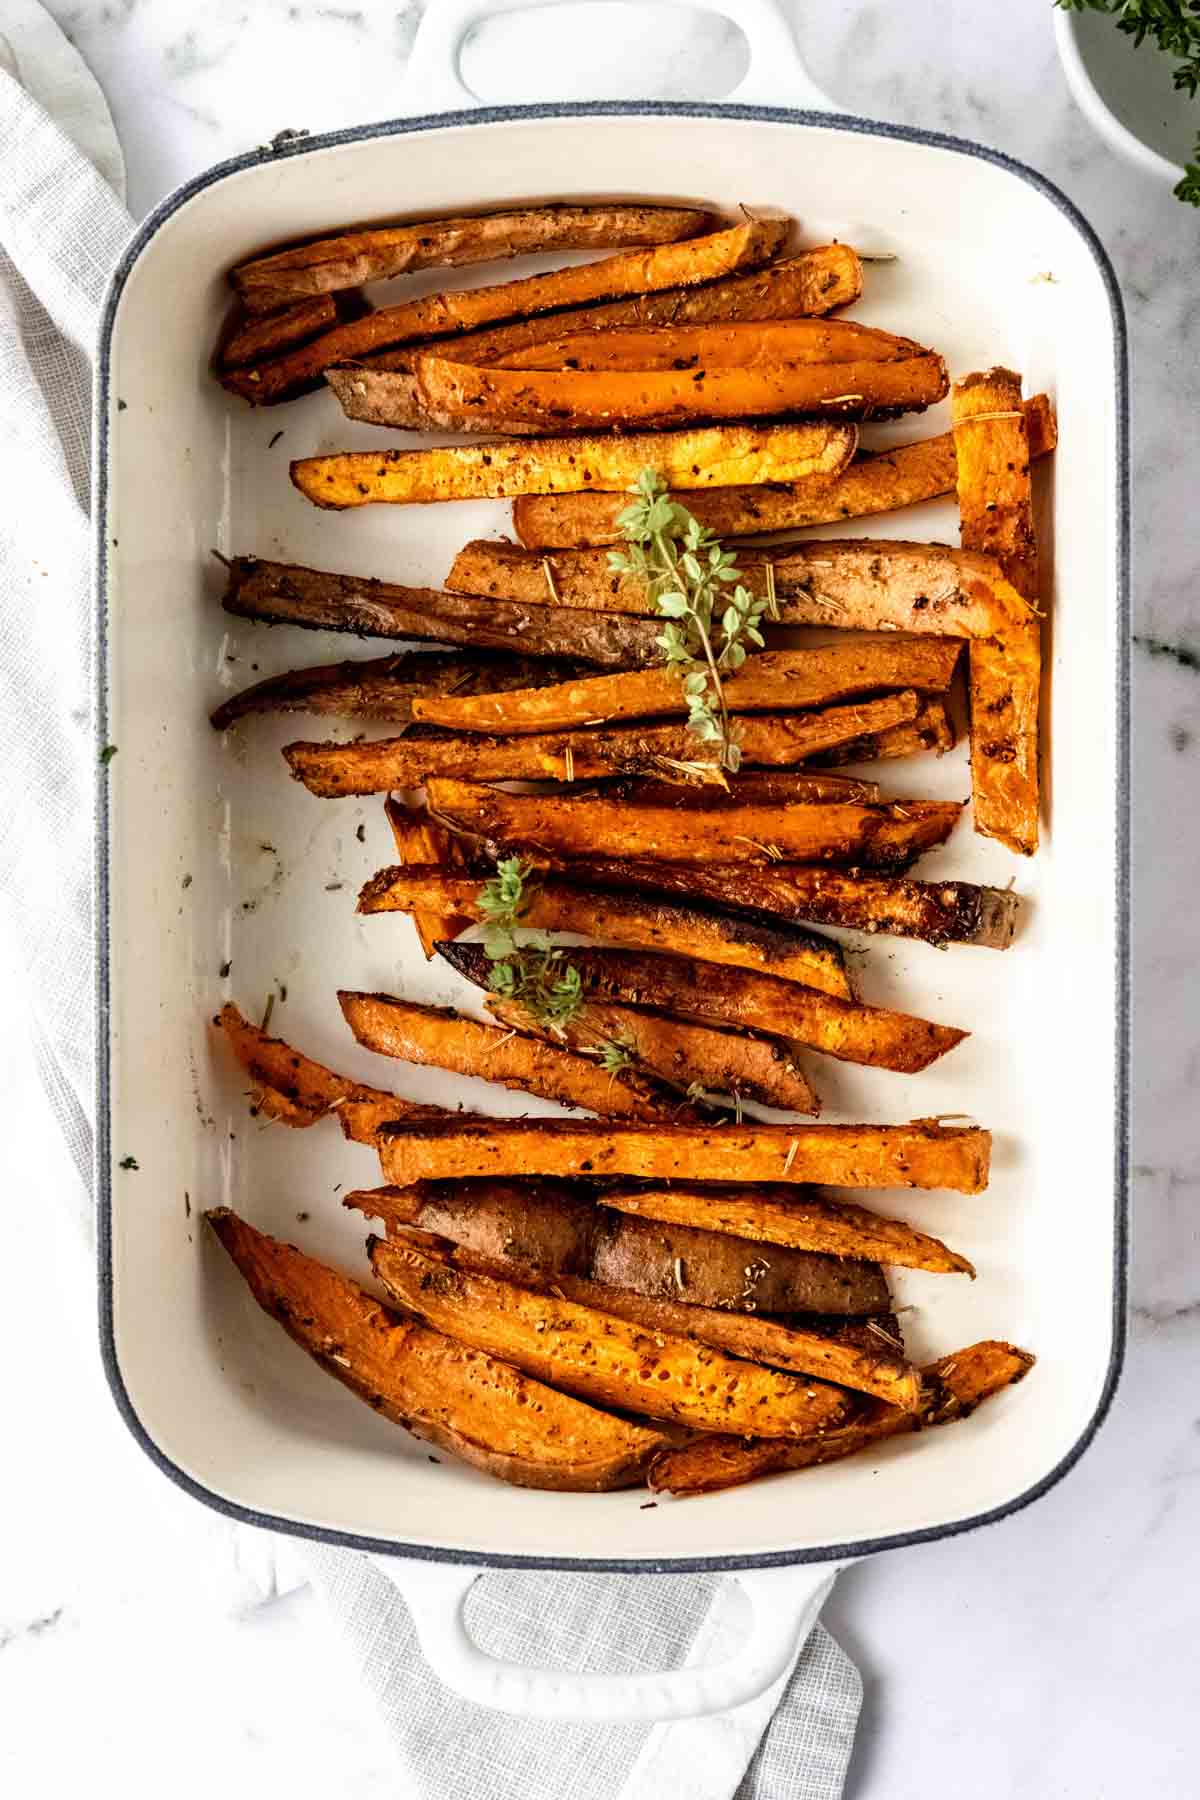 Overhead view of Herbes de Provence baked sweet potato fries in a white ceramic dish.